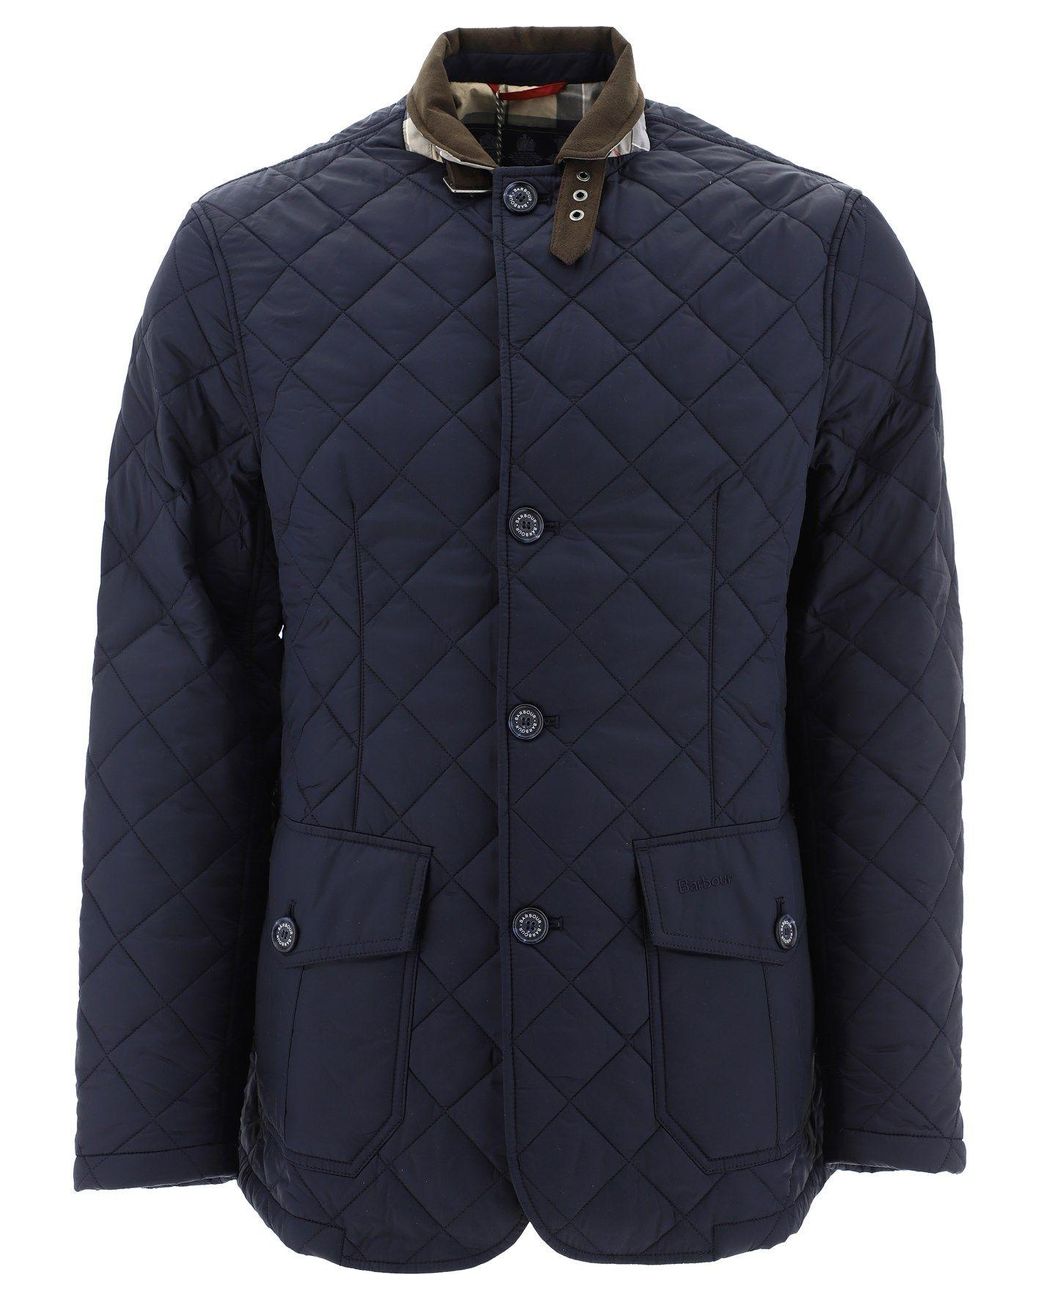 Barbour Other Materials Down Jacket in Blue for Men - Lyst